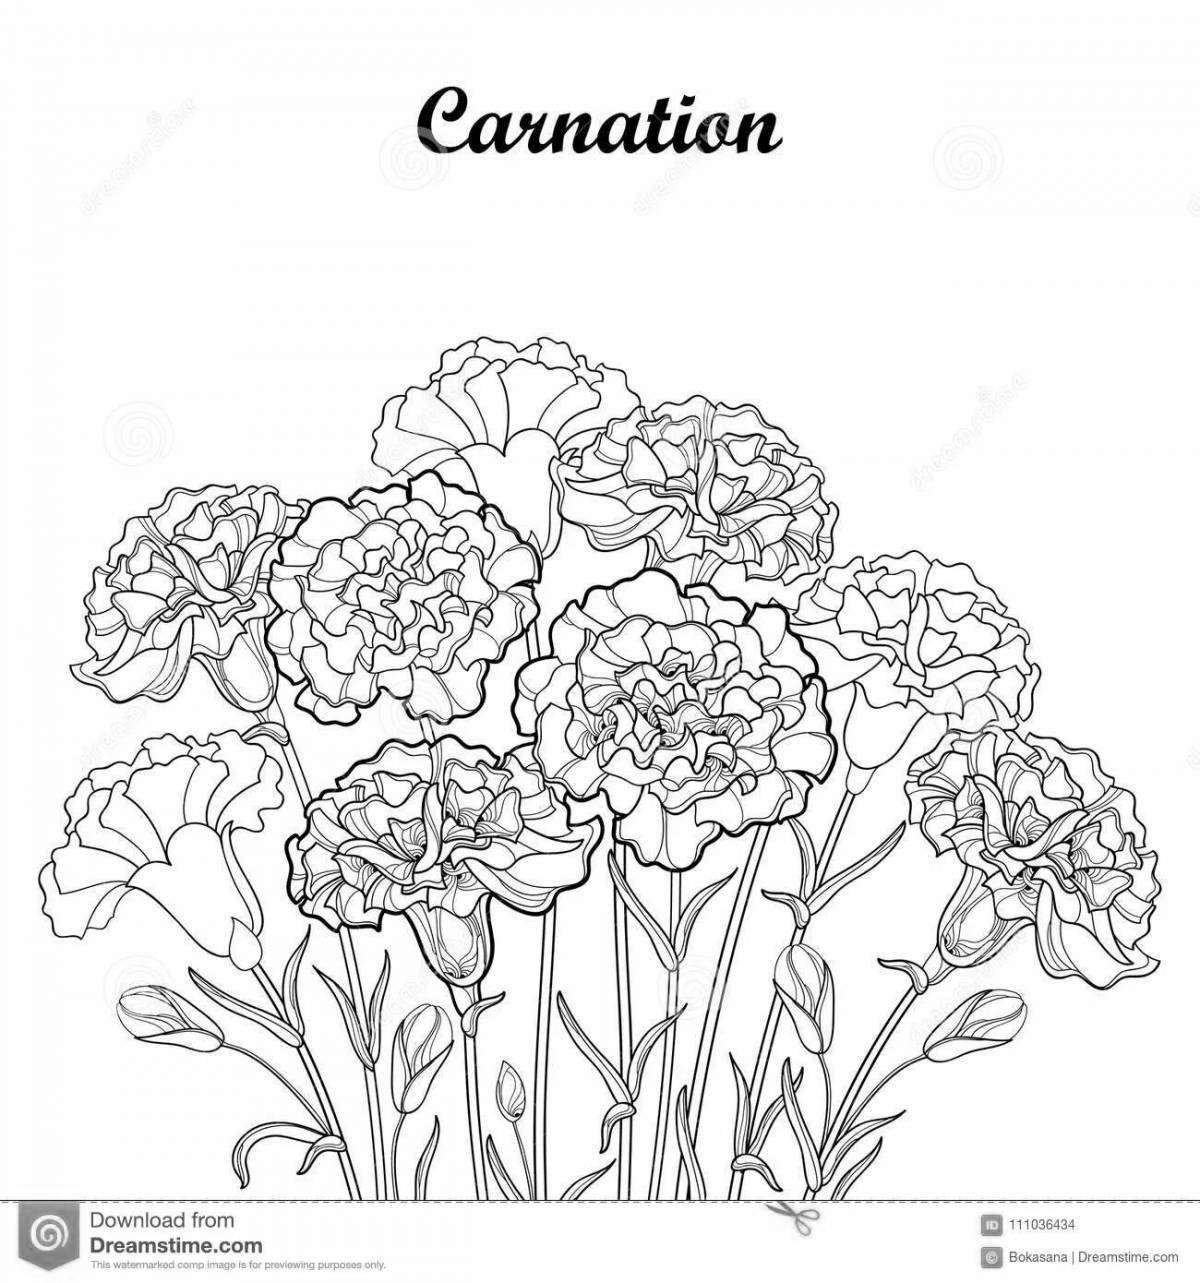 Colorful bouquet of carnations for May 9th